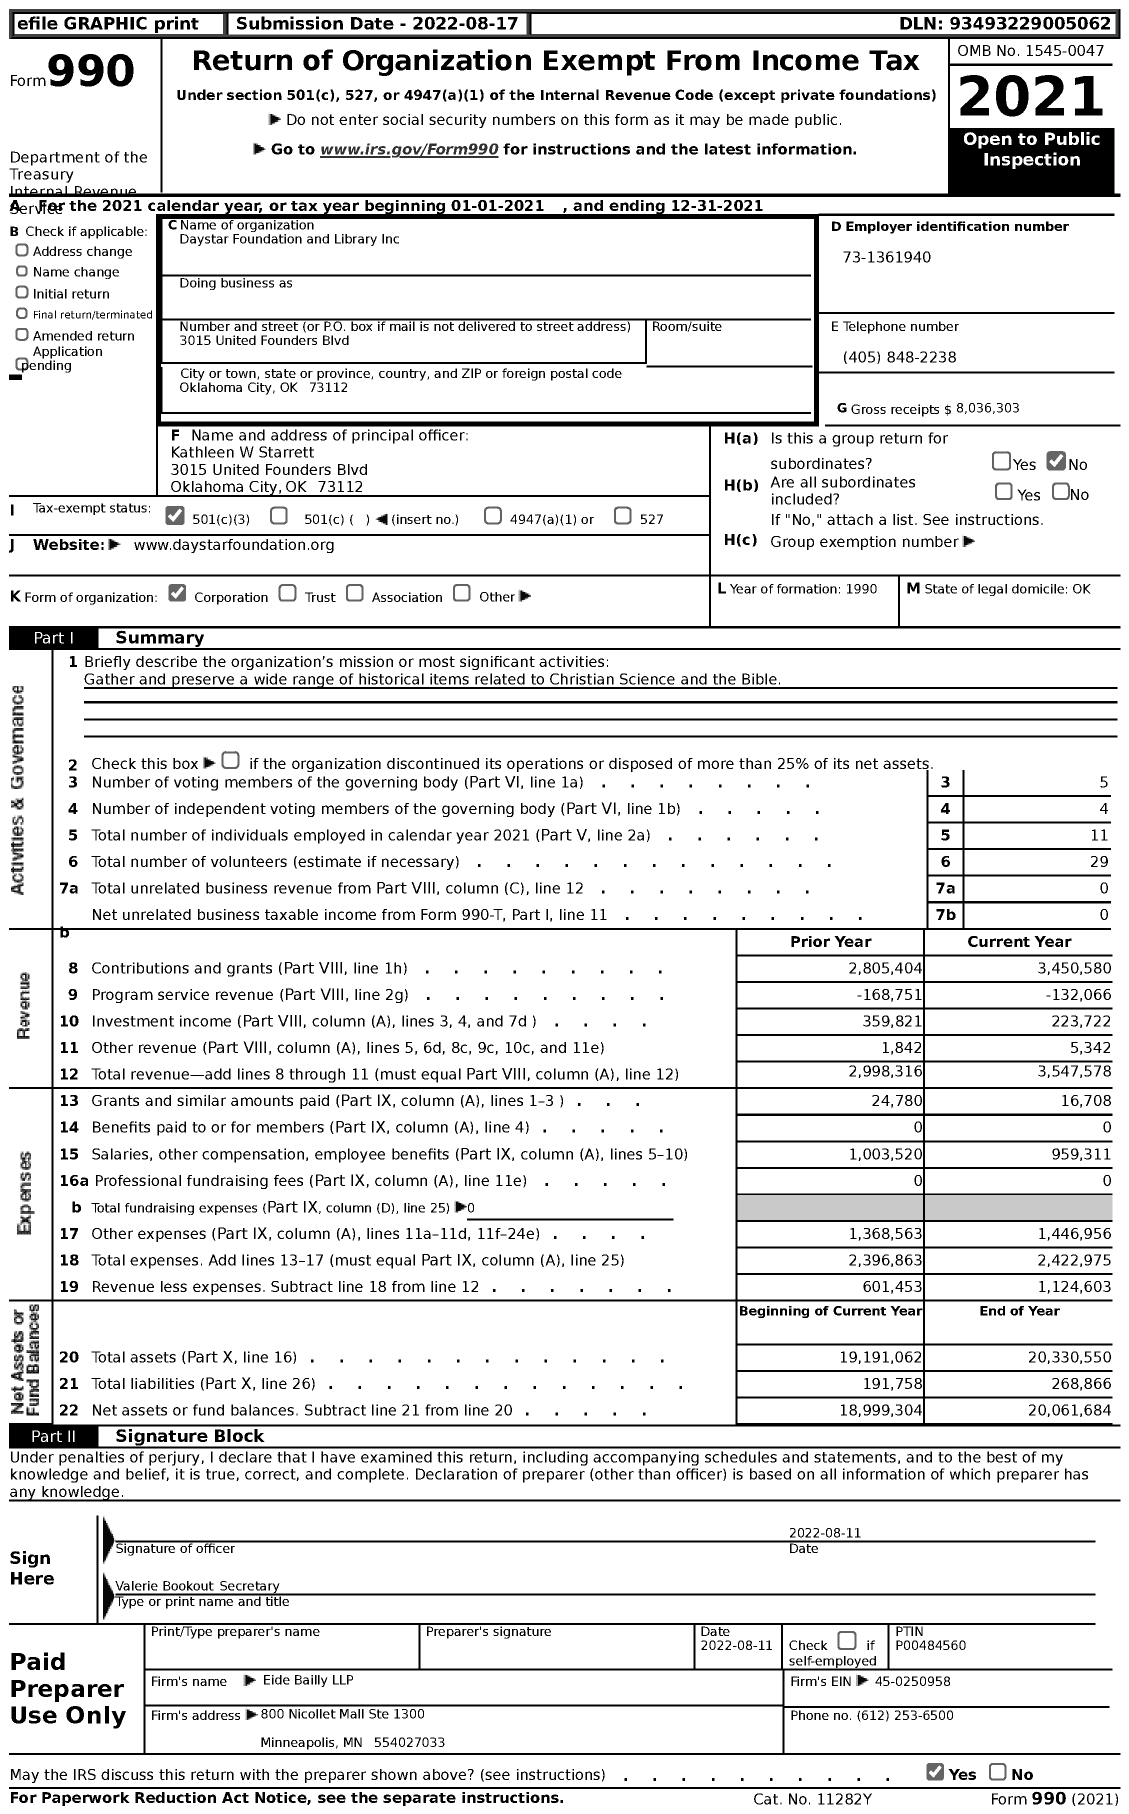 Image of first page of 2021 Form 990 for Daystar Foundation and Library